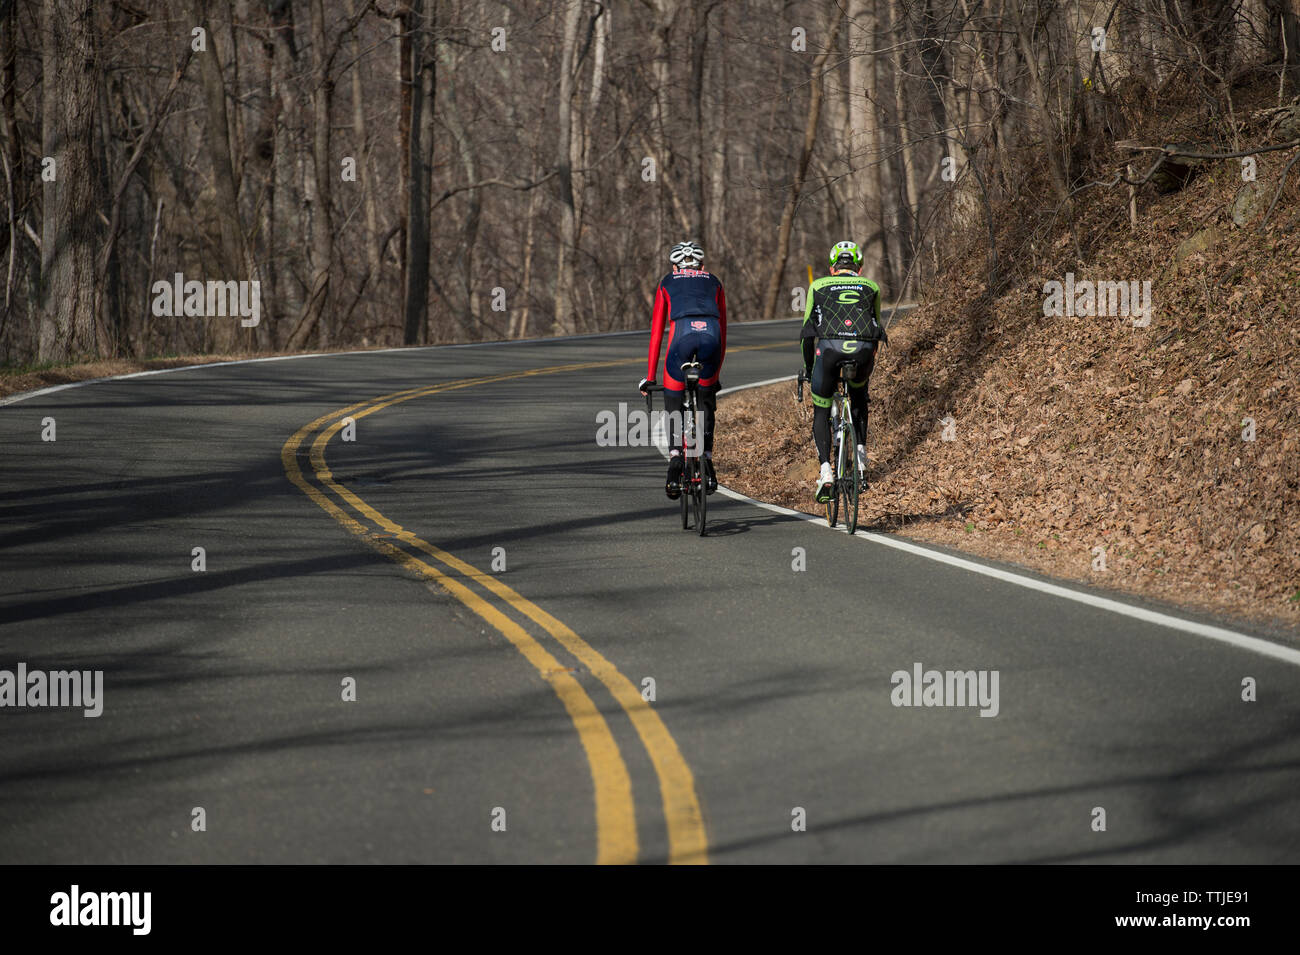 UNITED STATES - December 8, 2015: Pro cyclist Justin Mauch and Joe Dombrowski ride across Mt. Weather in the Blue Ridge Mountains of Virginia near Par Stock Photo